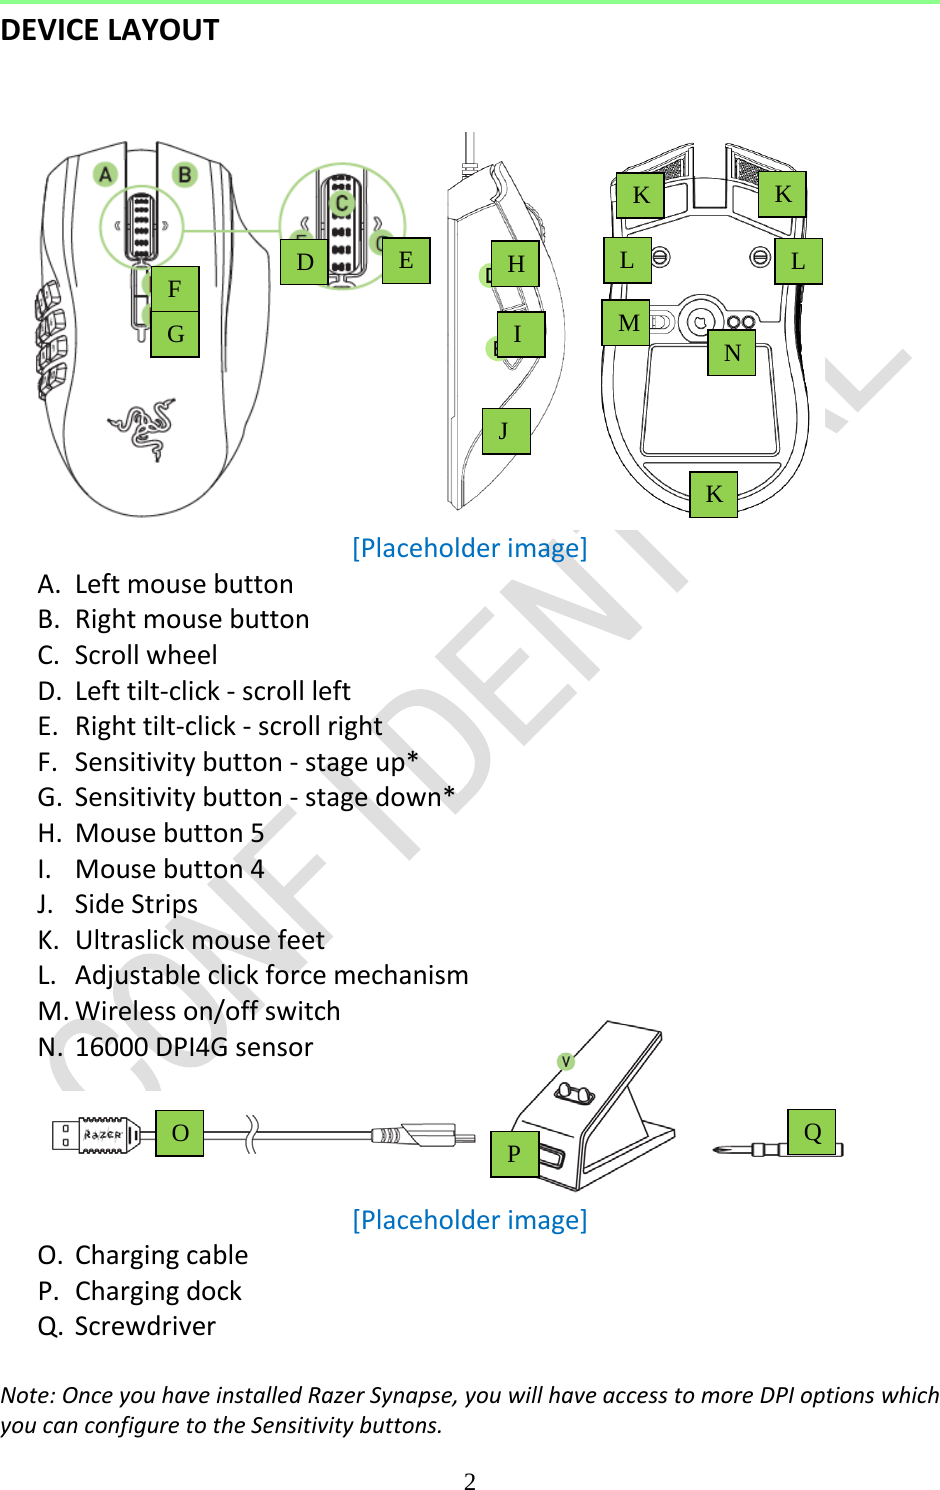  2  DEVICE LAYOUT    [Placeholder image] A. Left mouse button B. Right mouse button C. Scroll wheel D. Left tilt-click - scroll left E. Right tilt-click - scroll right F. Sensitivity button - stage up* G. Sensitivity button - stage down* H. Mouse button 5 I. Mouse button 4 J. Side Strips K. Ultraslick mouse feet L. Adjustable click force mechanism M. Wireless on/off switch N. 16000 DPI4G sensor     [Placeholder image] O. Charging cable P. Charging dock Q. Screwdriver  Note: Once you have installed Razer Synapse, you will have access to more DPI options which you can configure to the Sensitivity buttons. H I K K L L K N O P Q M D E F G J 